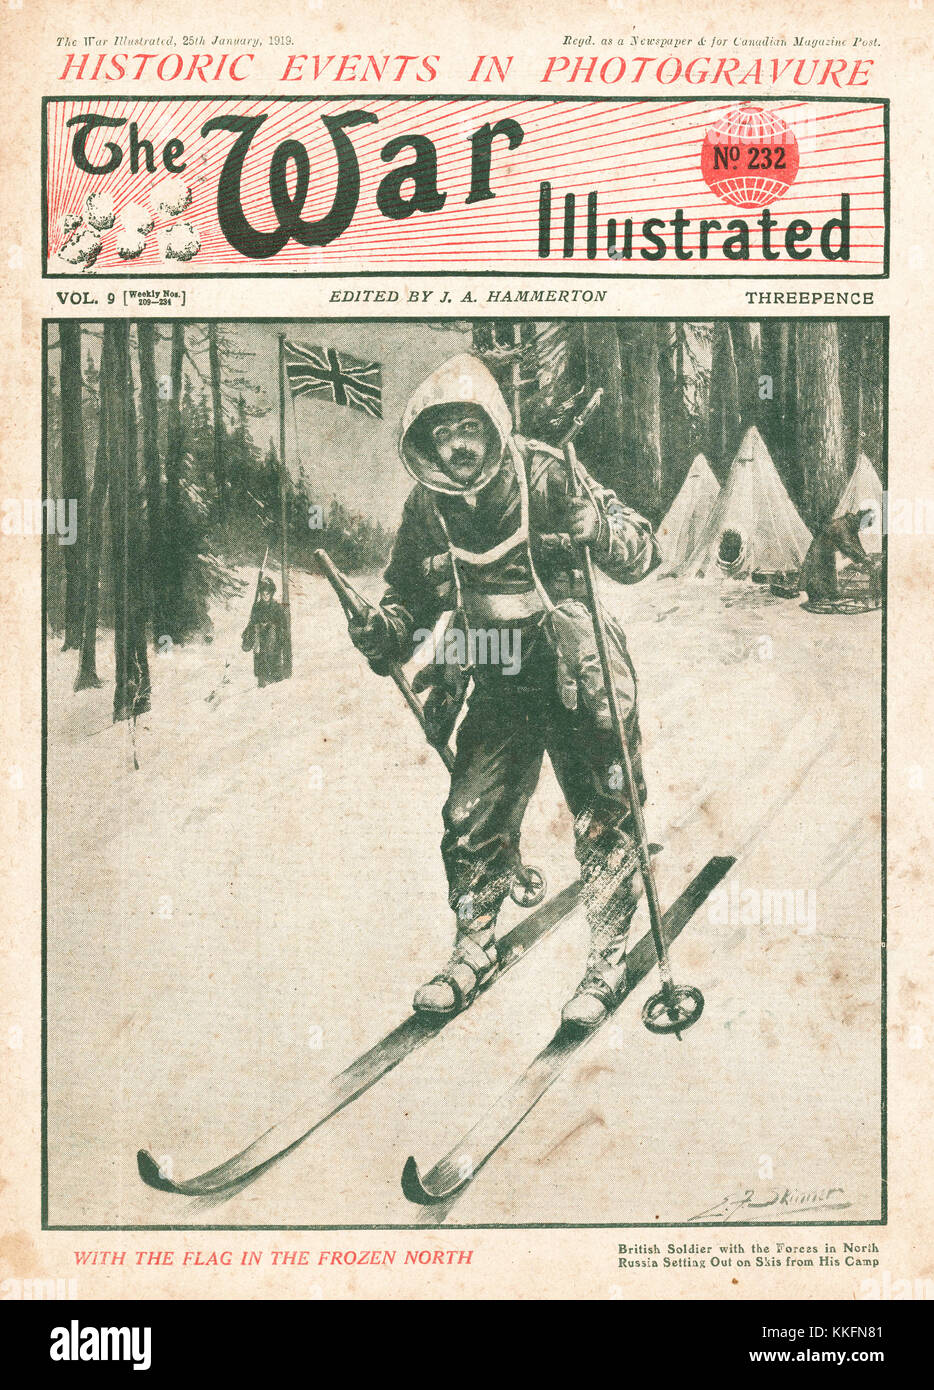 1919 War Illustrated British soldier on skis in Northern Russia Stock Photo